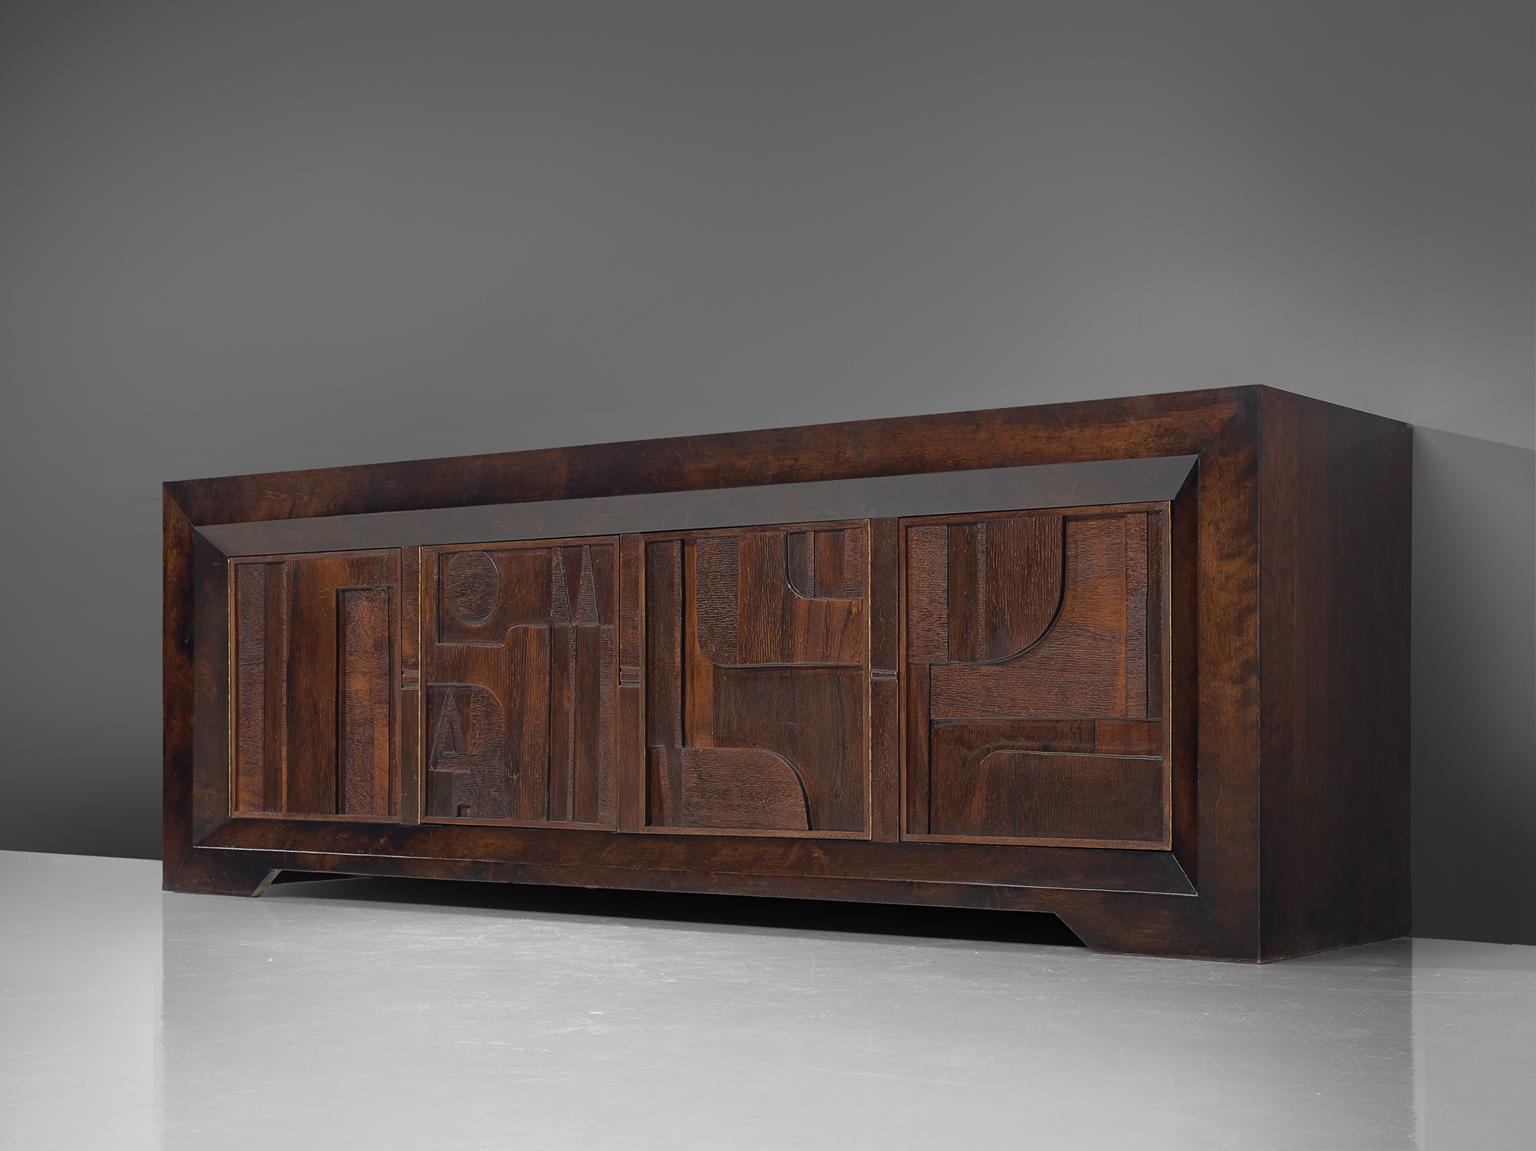 Nerone and Patuzzi for Gruppo NP2, sculptural sideboard, wood and glass, Italy, 1970s.

This rare wooden sculptural sideboard is designed by Nerone and Patuzzi for Gruppo NP2. The Abstract Constructivism sideboard features high relief doors, which